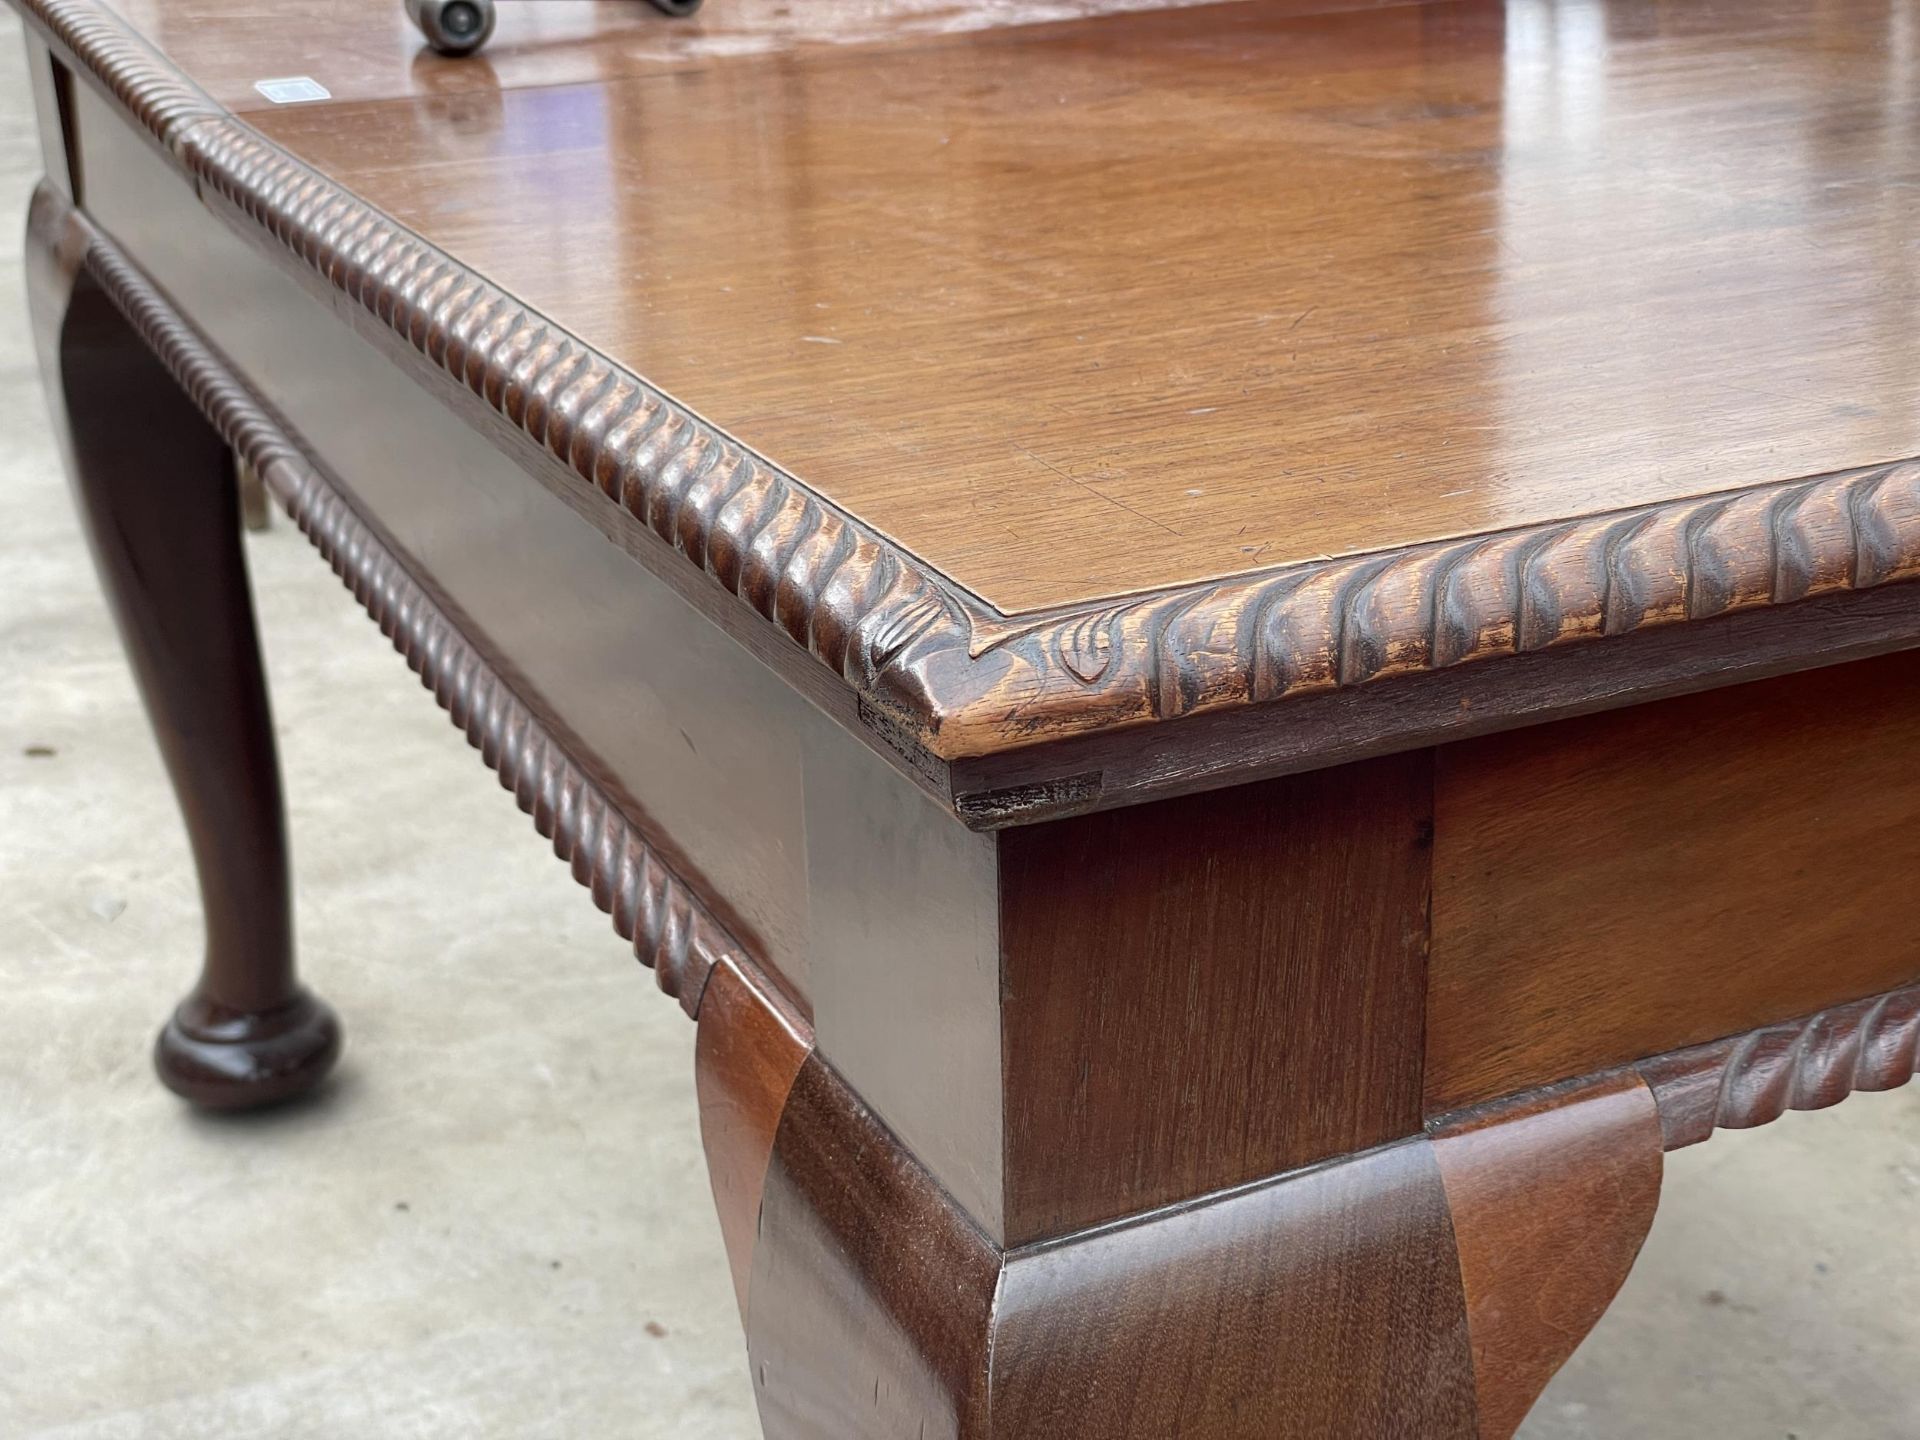 AN EARLY 20TH CENTURY MAHOGANY WIND-OUT DINING TABLE ON CABRIOLE LEGS, WITH ROPE EDGE, 57 X 41" ( - Image 3 of 7